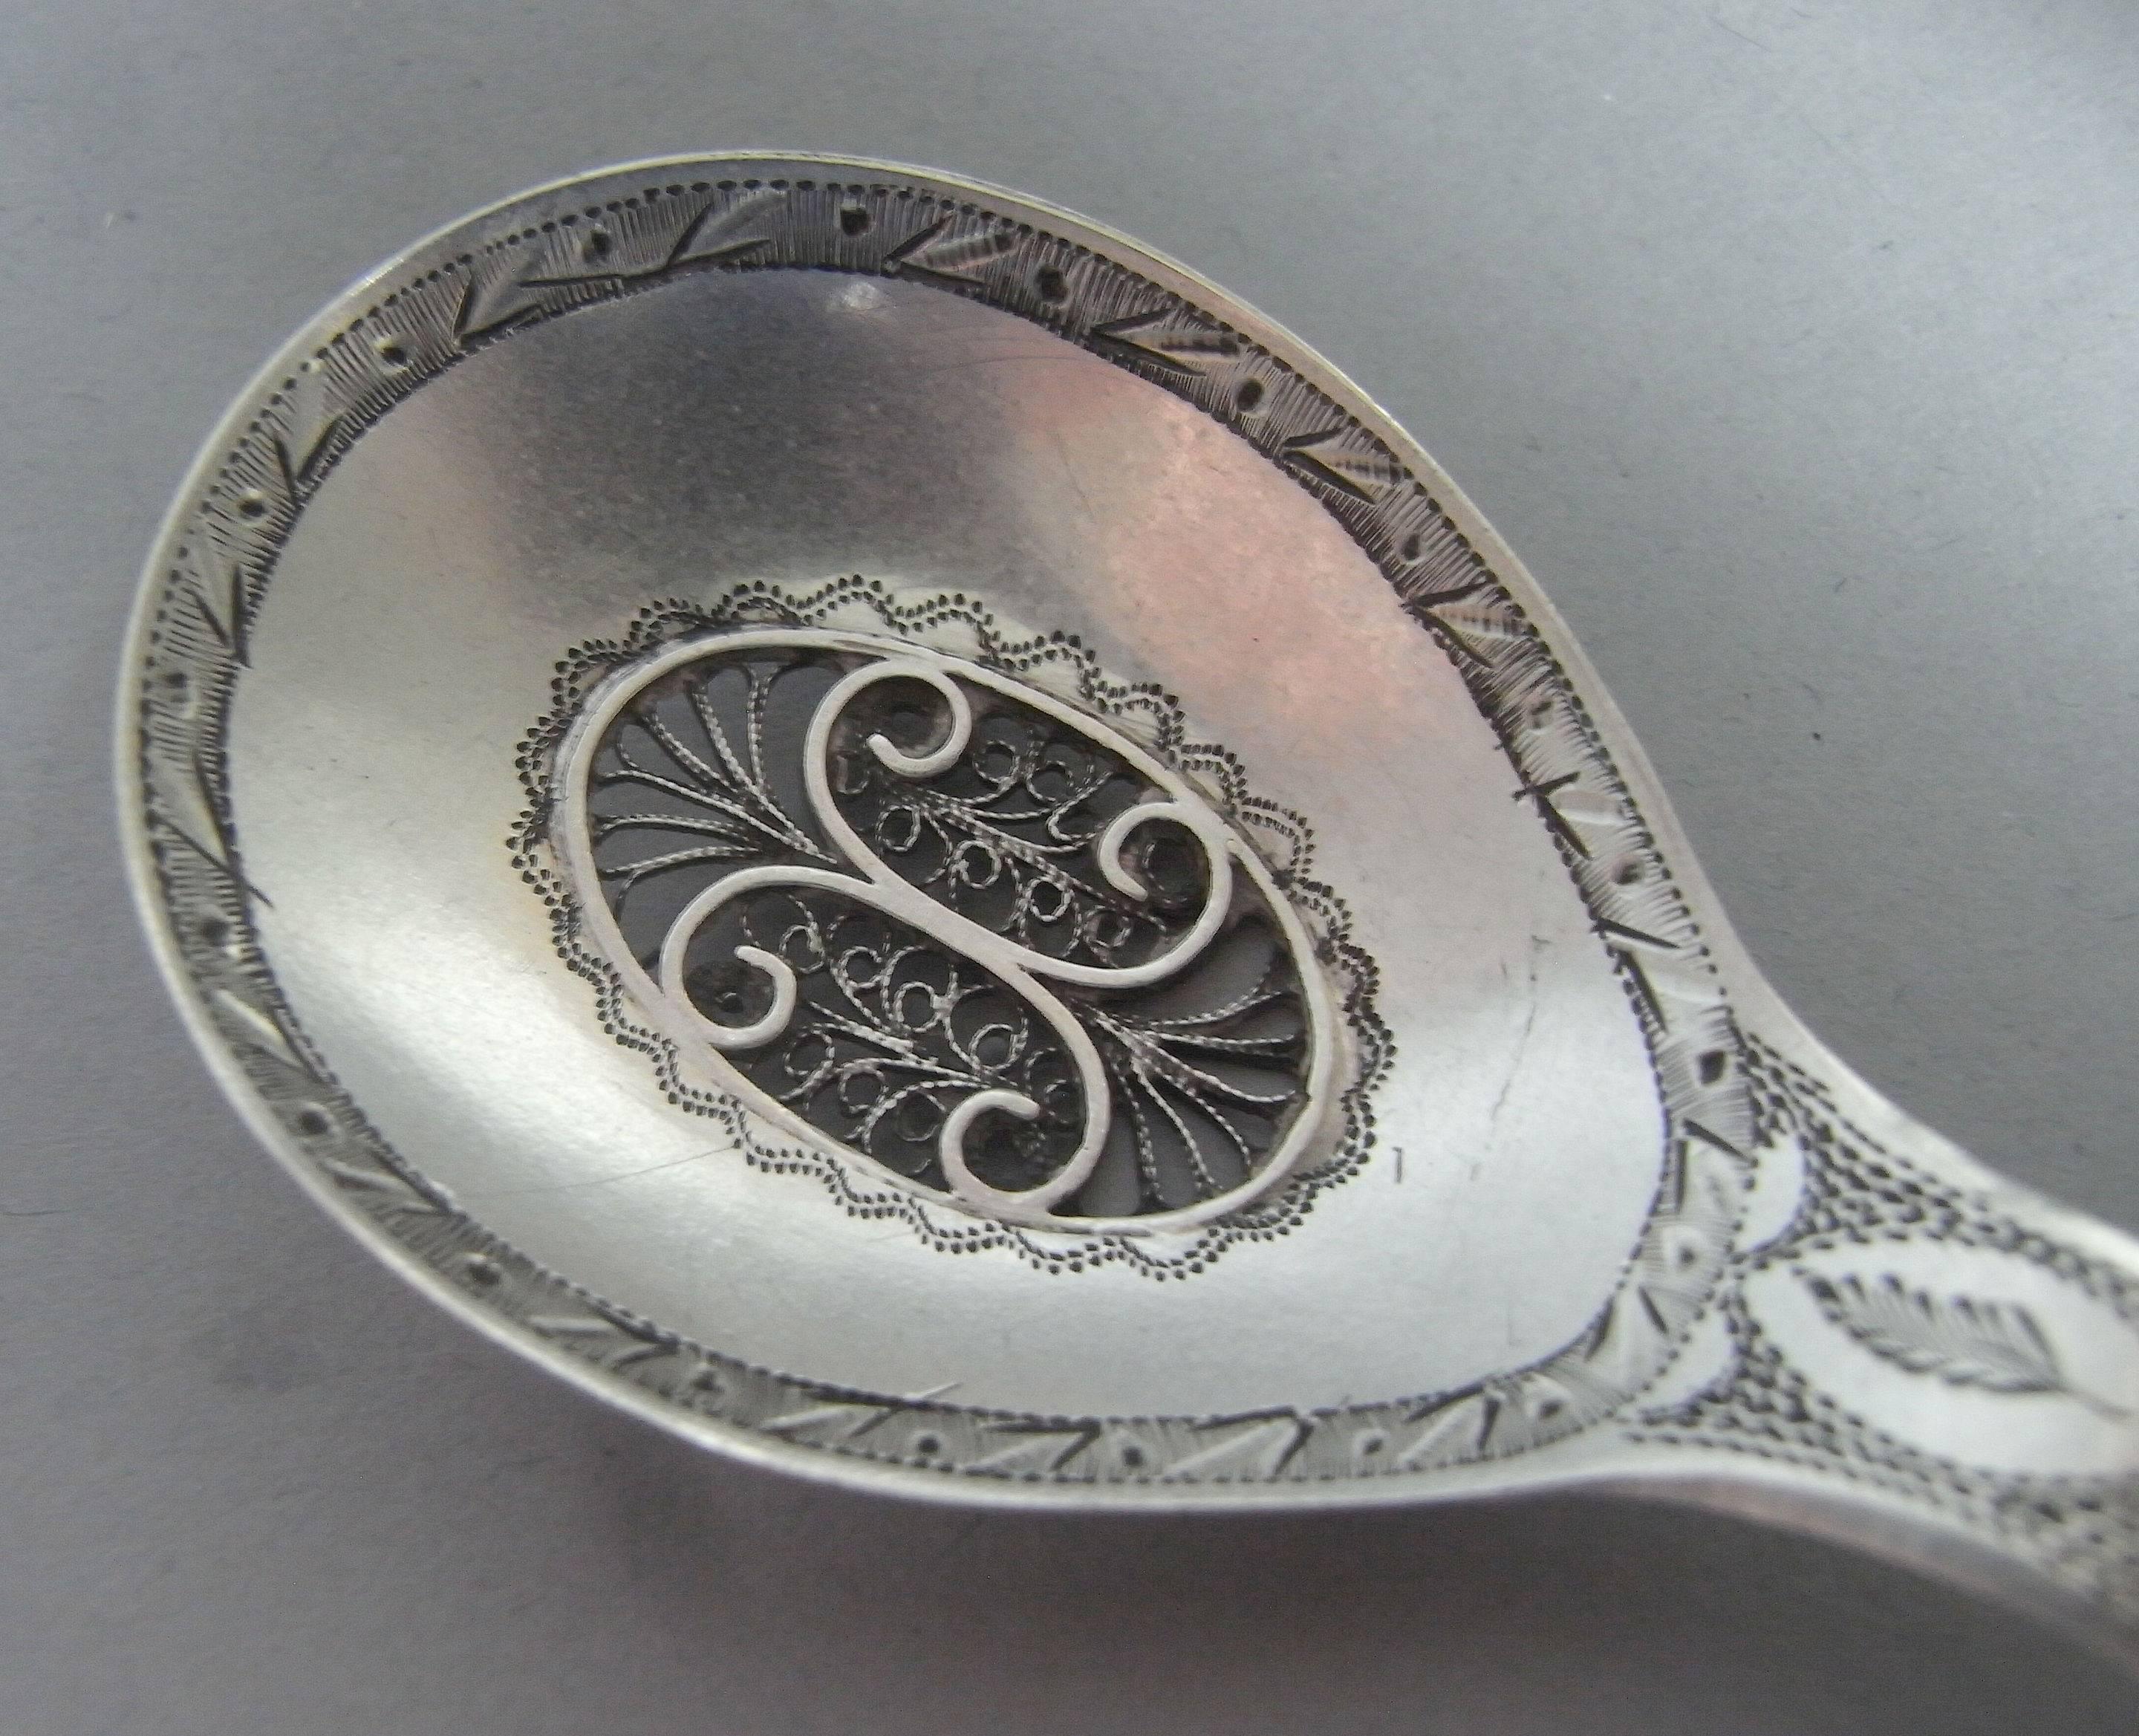 The caddy spoon has an oval bowl with prick dot engraved border. The centre is inset with a filigree scroll panel and the handle is engraved with foliate and prick dot designs, in addition to an oval cartouche engraved with a contemporary script